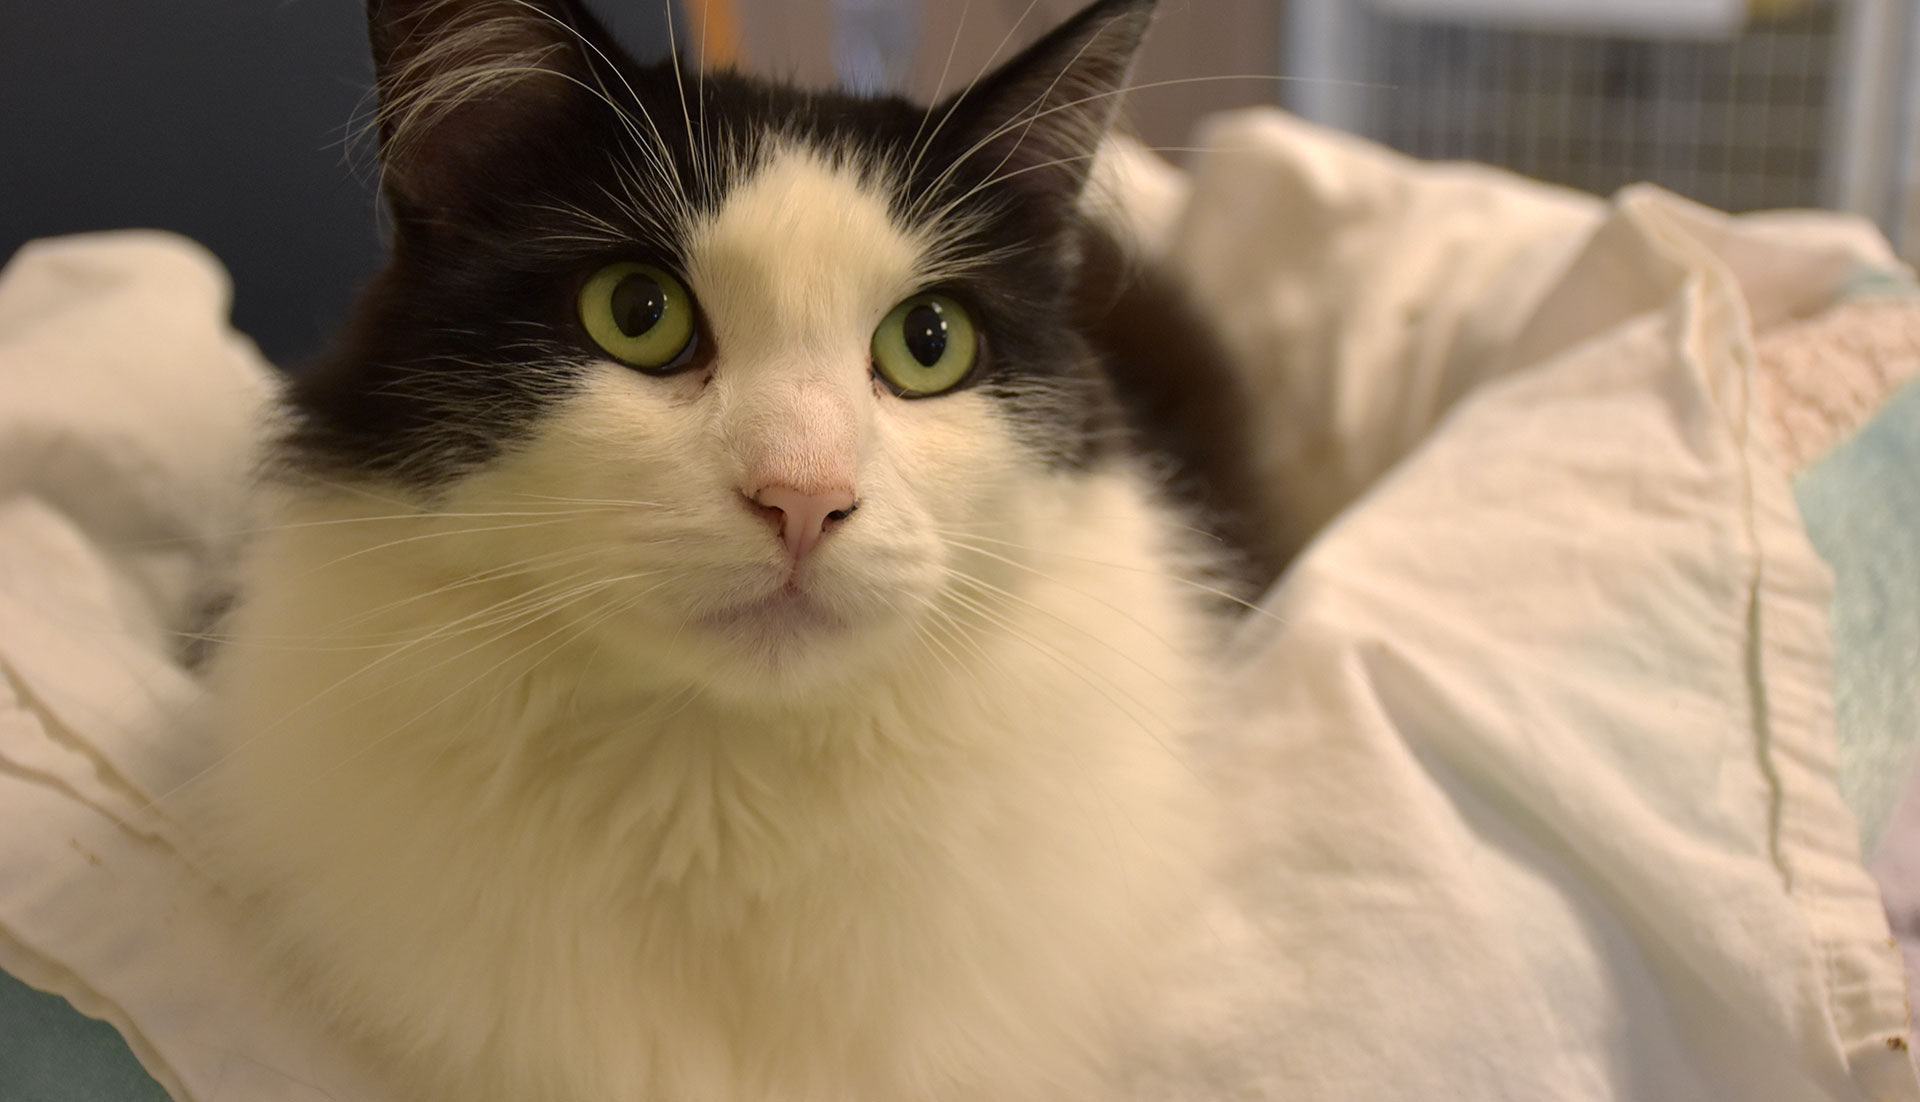 Kiwi's previous owner shot four beebee pellets into his spine, causing him to lose control of his bowel movements and have greater sensitivity in his legs. Bianco advises those who enter to 